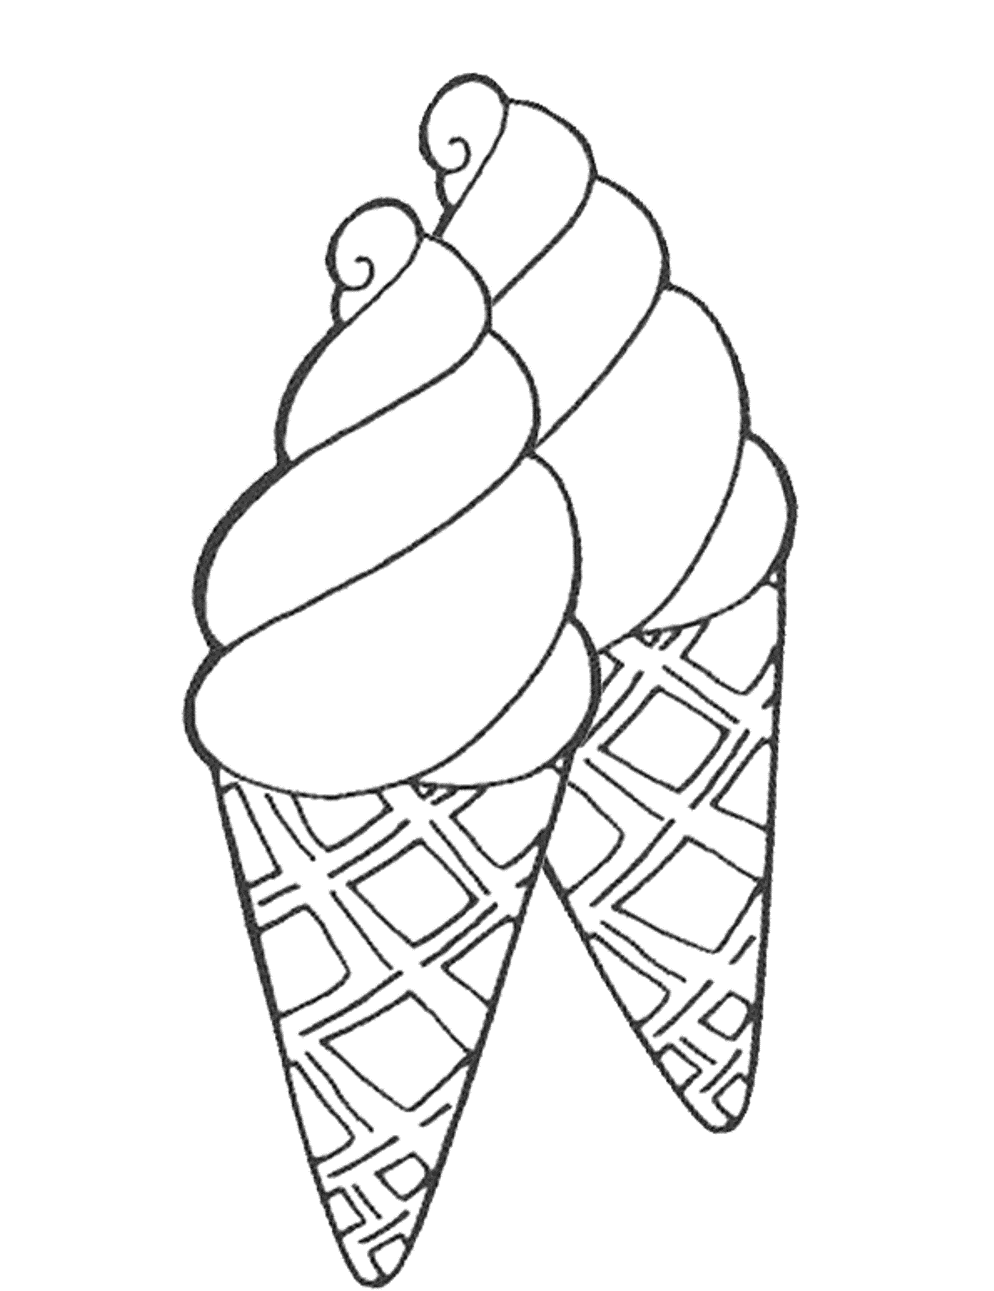 Cute Ice Cream Cone Drawing at GetDrawings Free download